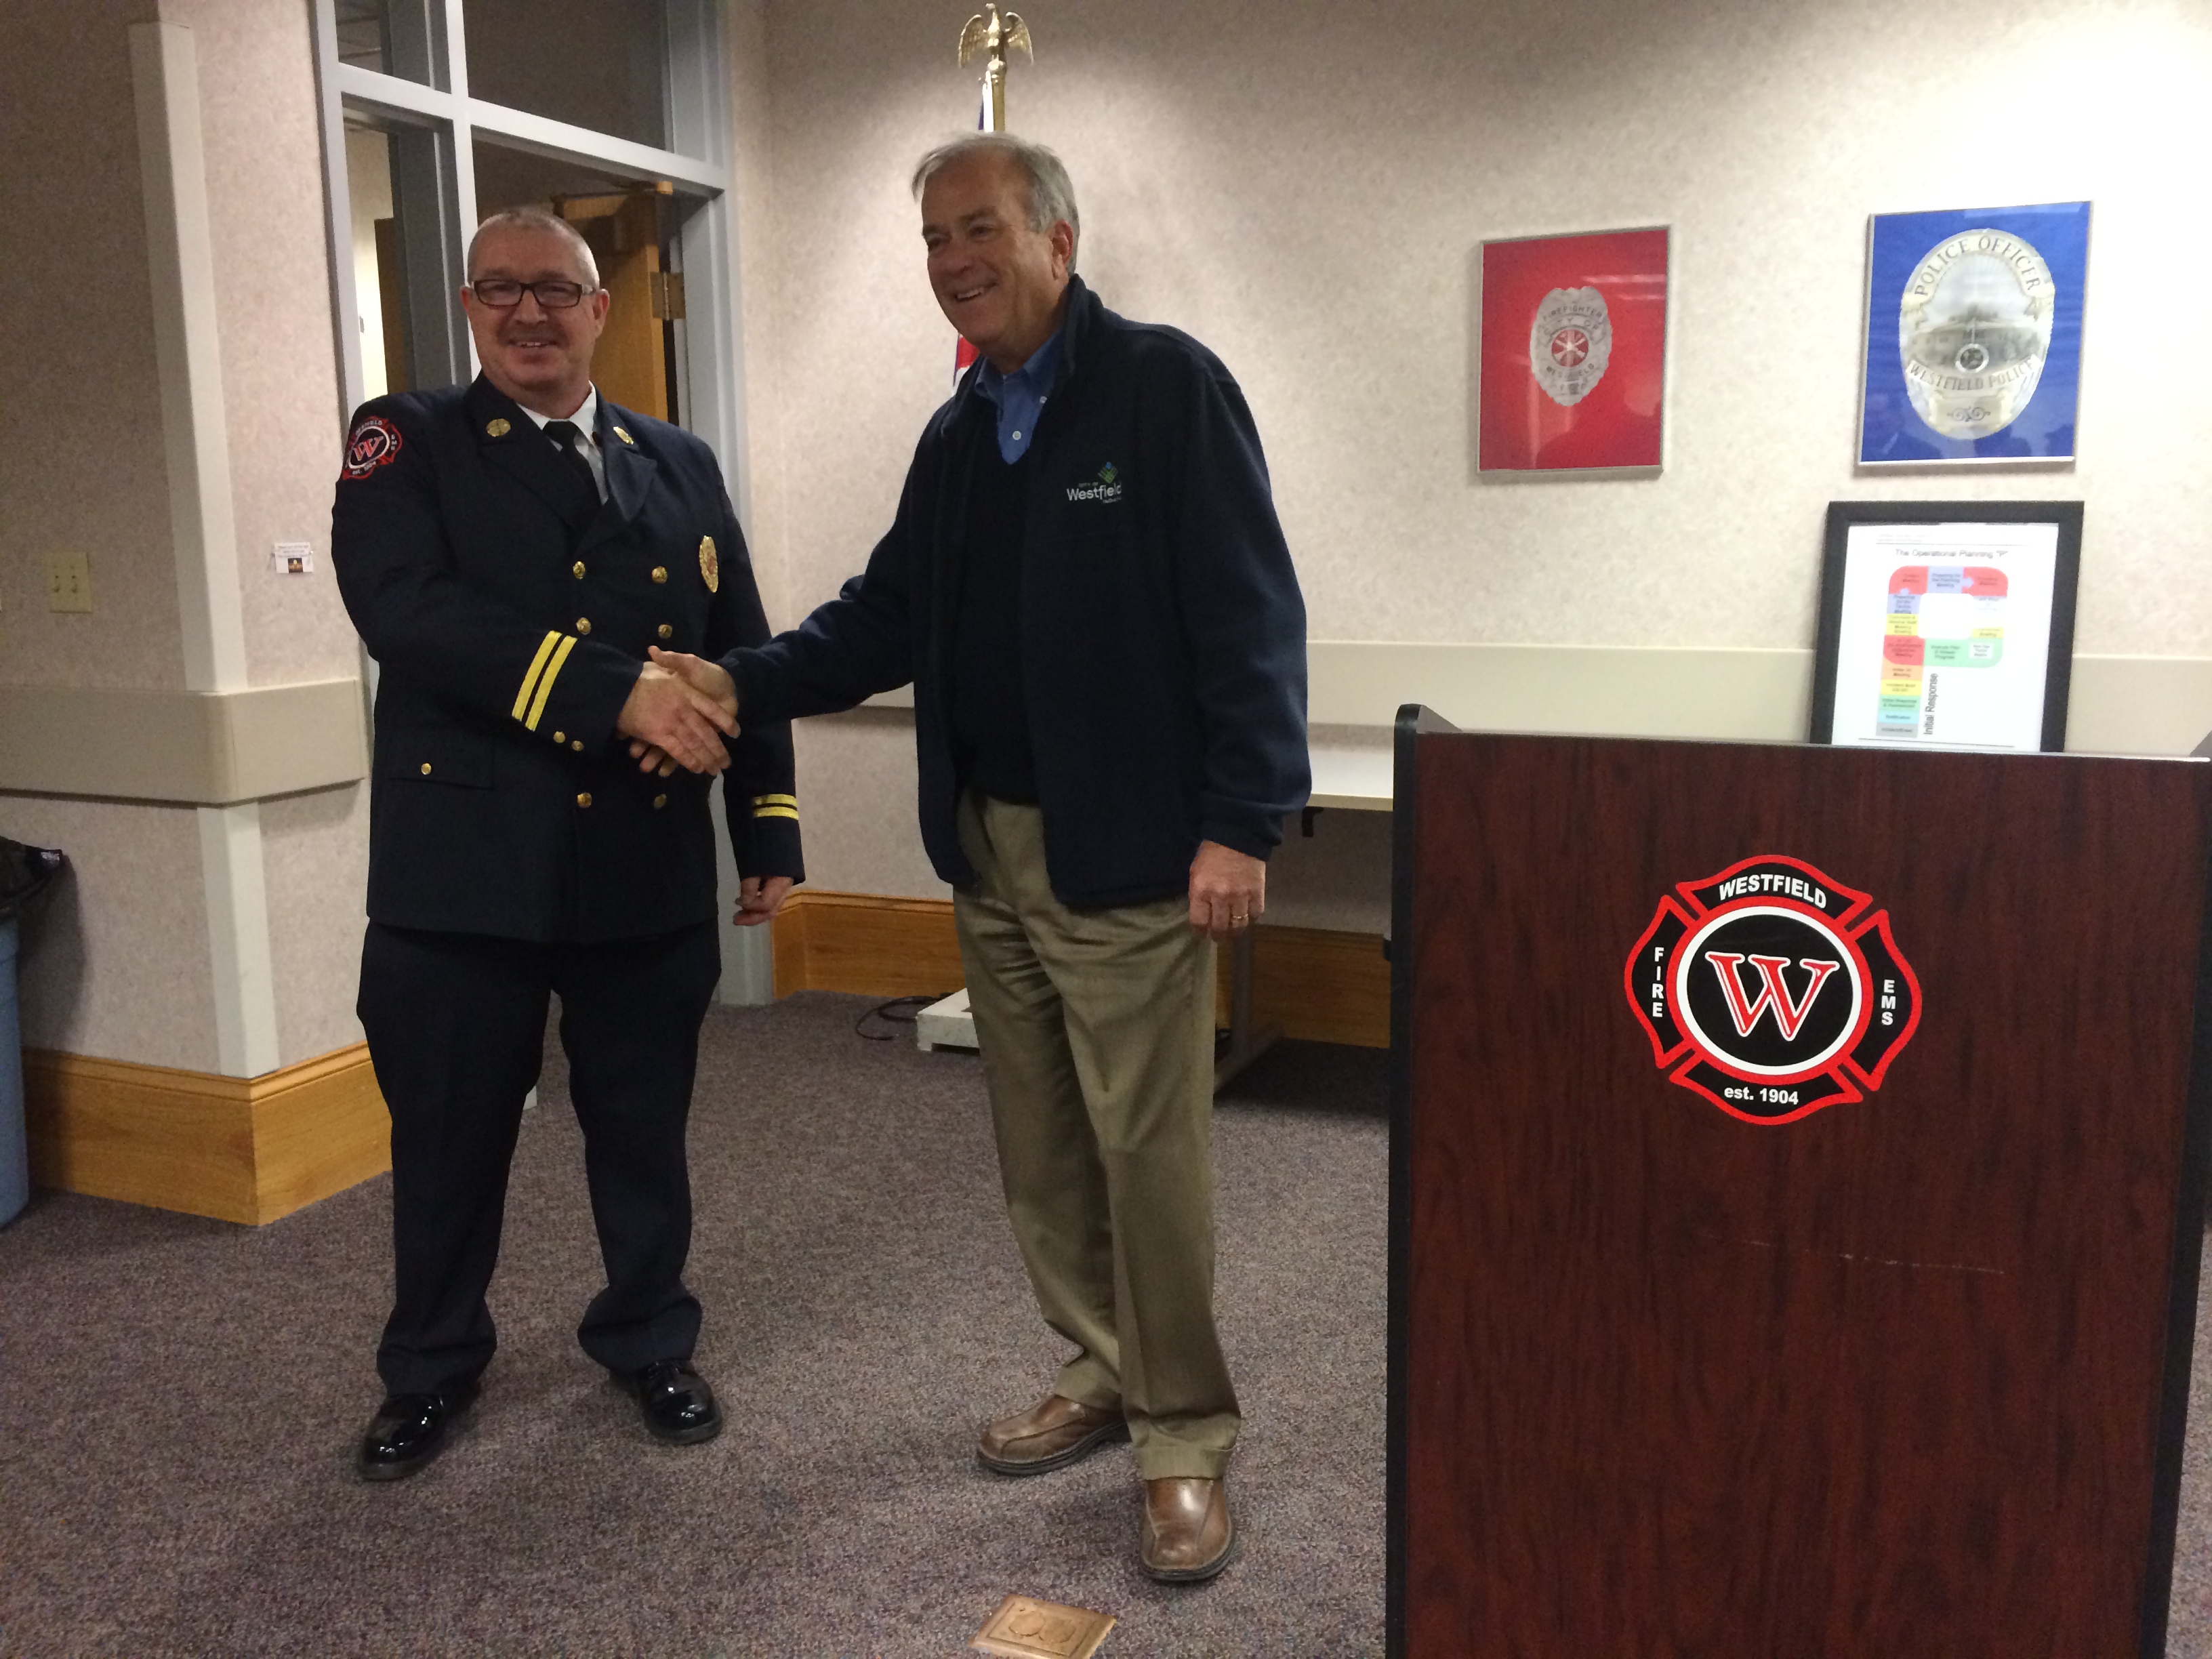 Joe Lyons was appointed as the new Westfield fire chief today by Mayor Andy Cook. Lyons, left, began his career with the department in 1996.